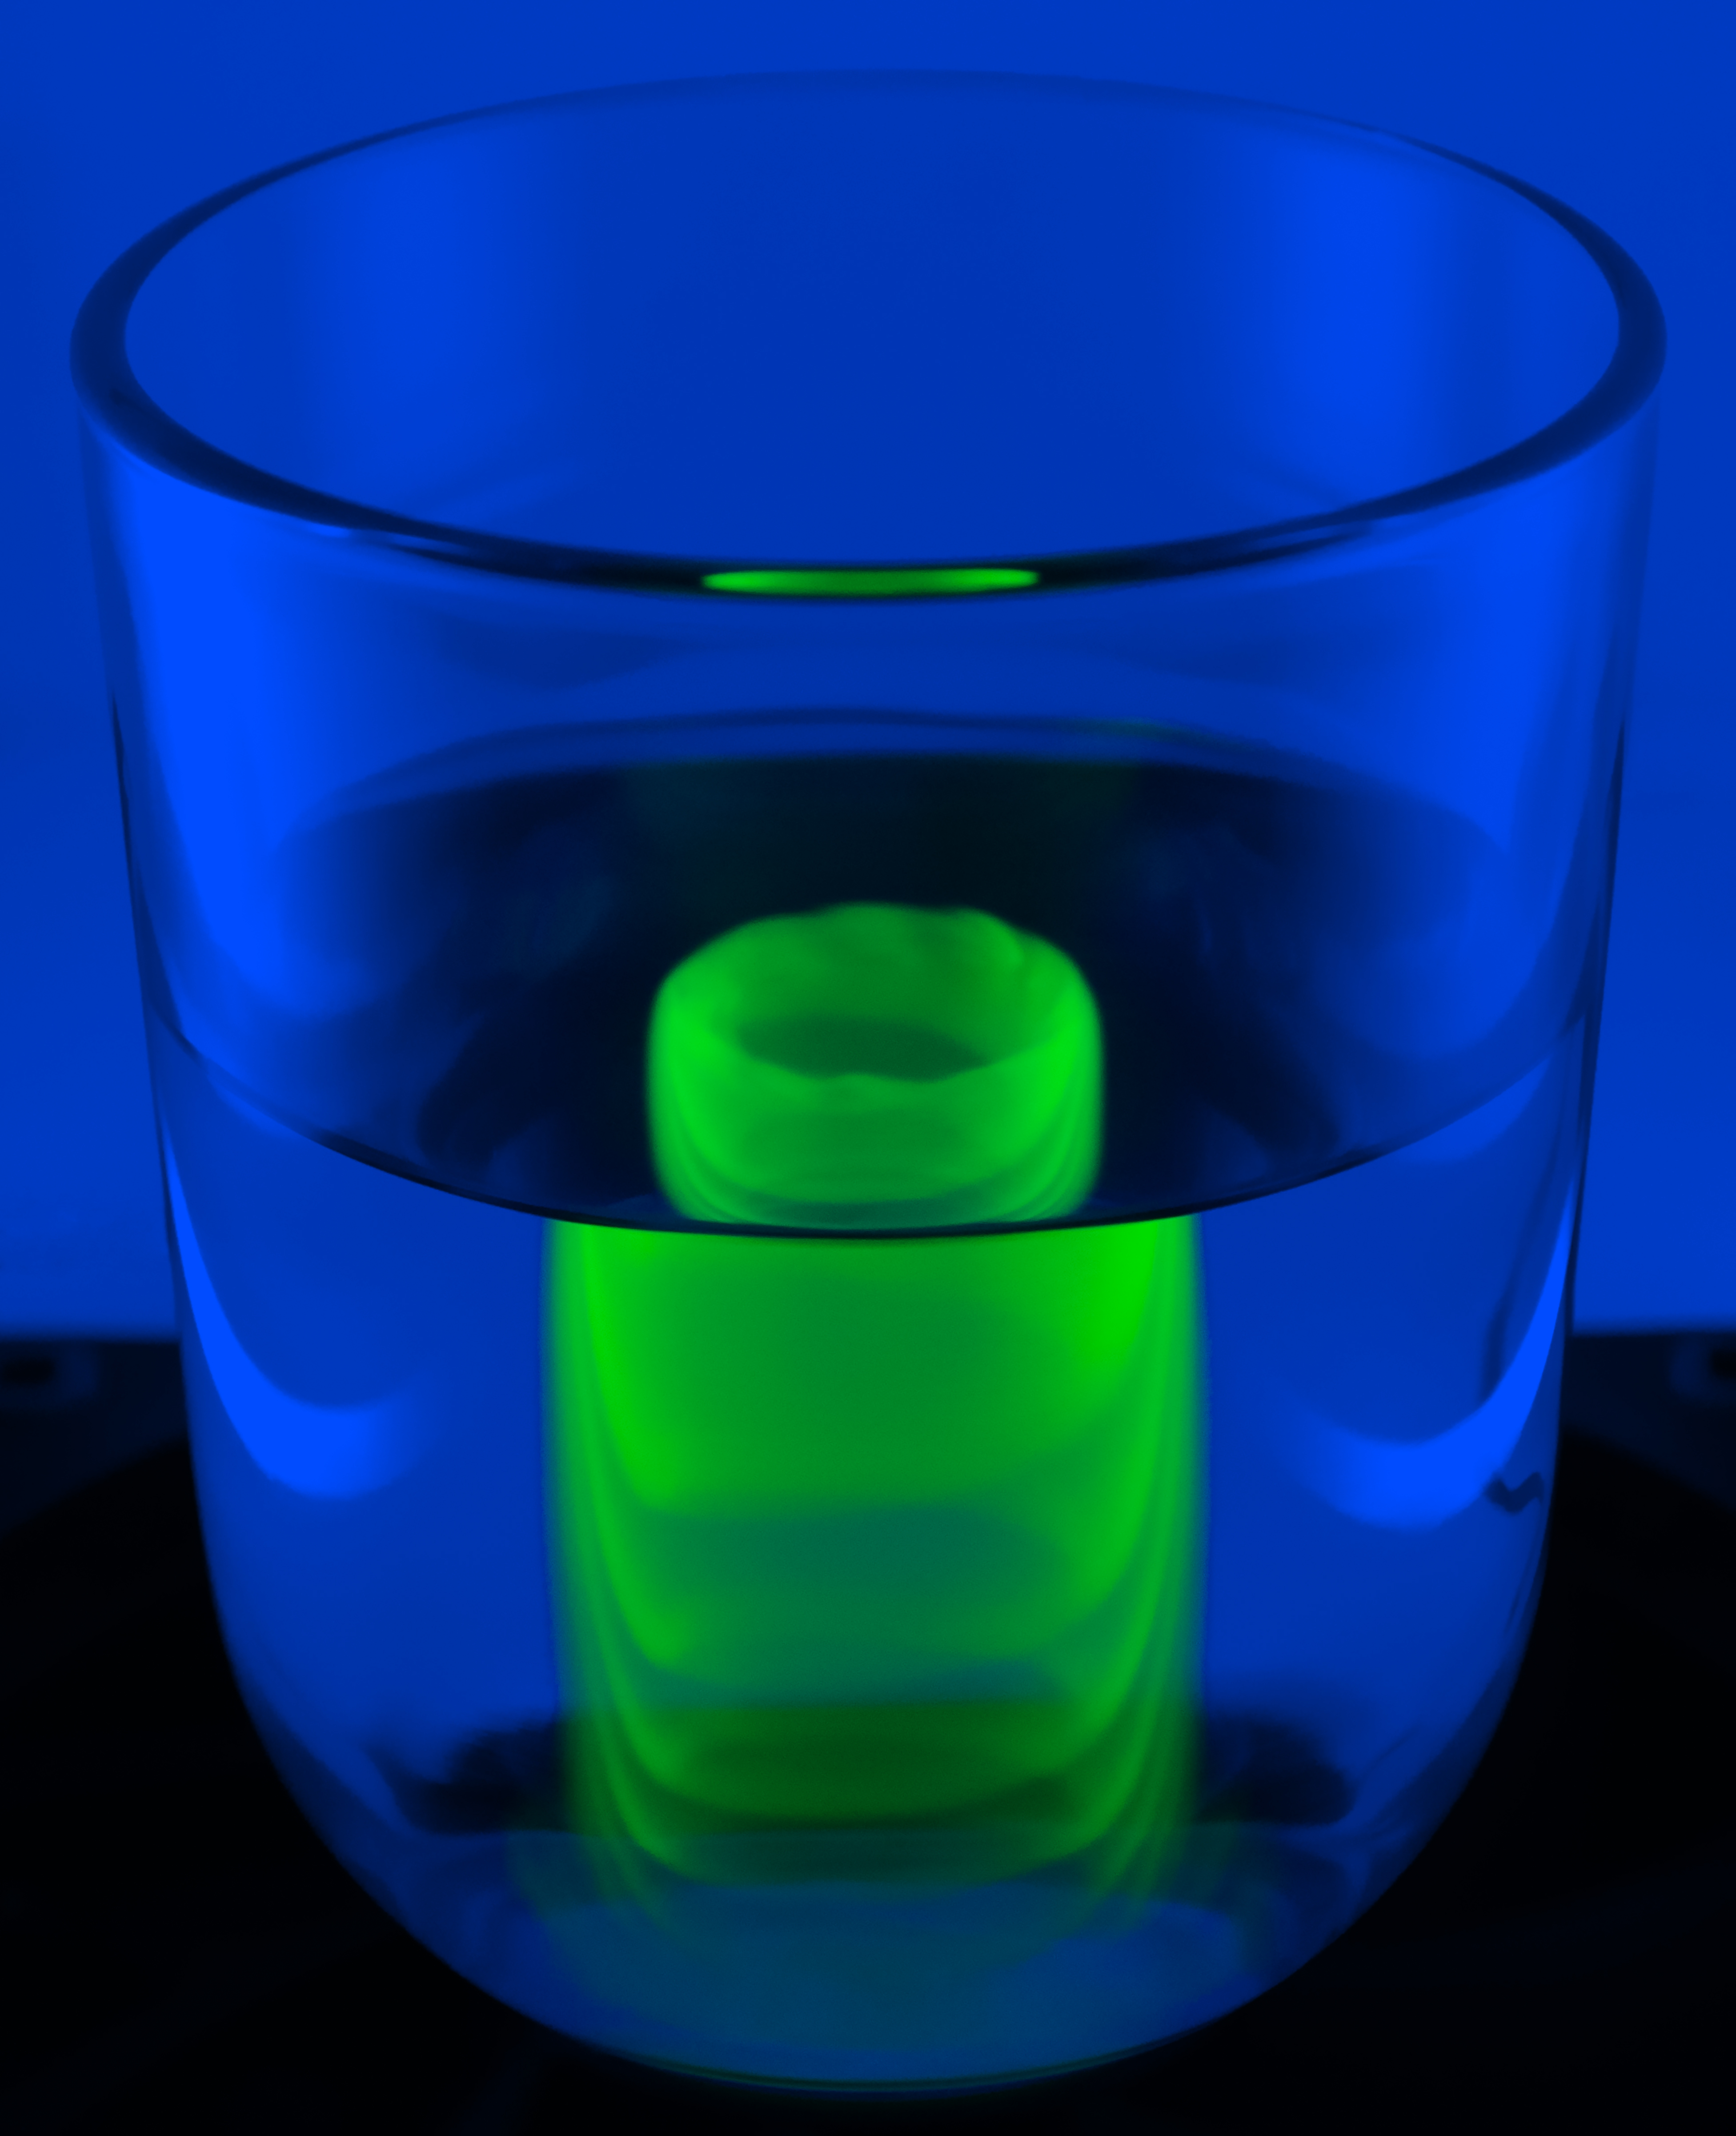 A column is formed in a rotating glass of water as fluorescent green dye is introduced. At low Rossby number, the Coriolis force dominates, controlling the dye motion. This unfiltered UV-illuminated image shows spiral filaments, mirroring the structure of a large-scale natural storm, also governed by the same invisible force.